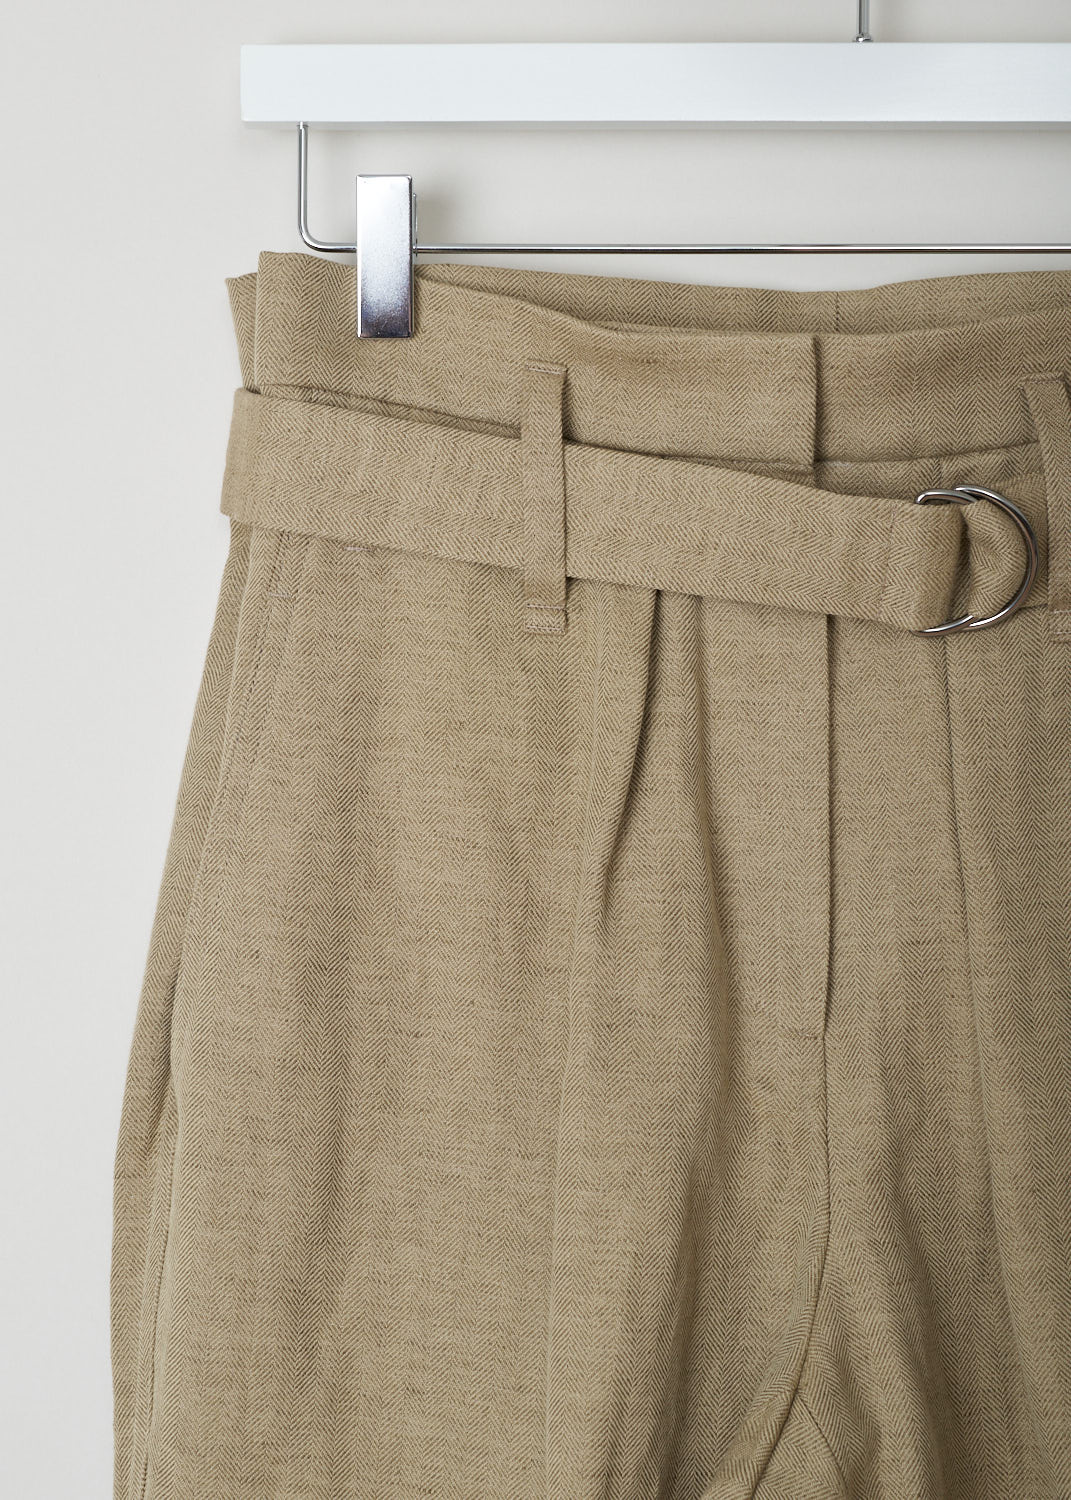 Brunello Cucinelli, high-waisted khaki paperbag pants, MF553P6588_C7178, green, detail, High-waist paperbag pants, featuring a D-ring belt and forward slanted pockets. With the cropped length you can show off any shoe you are wearing. Featuring a pleated front and a zipper with a press button as your fastening option. On the back this model has two welt pockets and a elastic waistband for more comfort. 